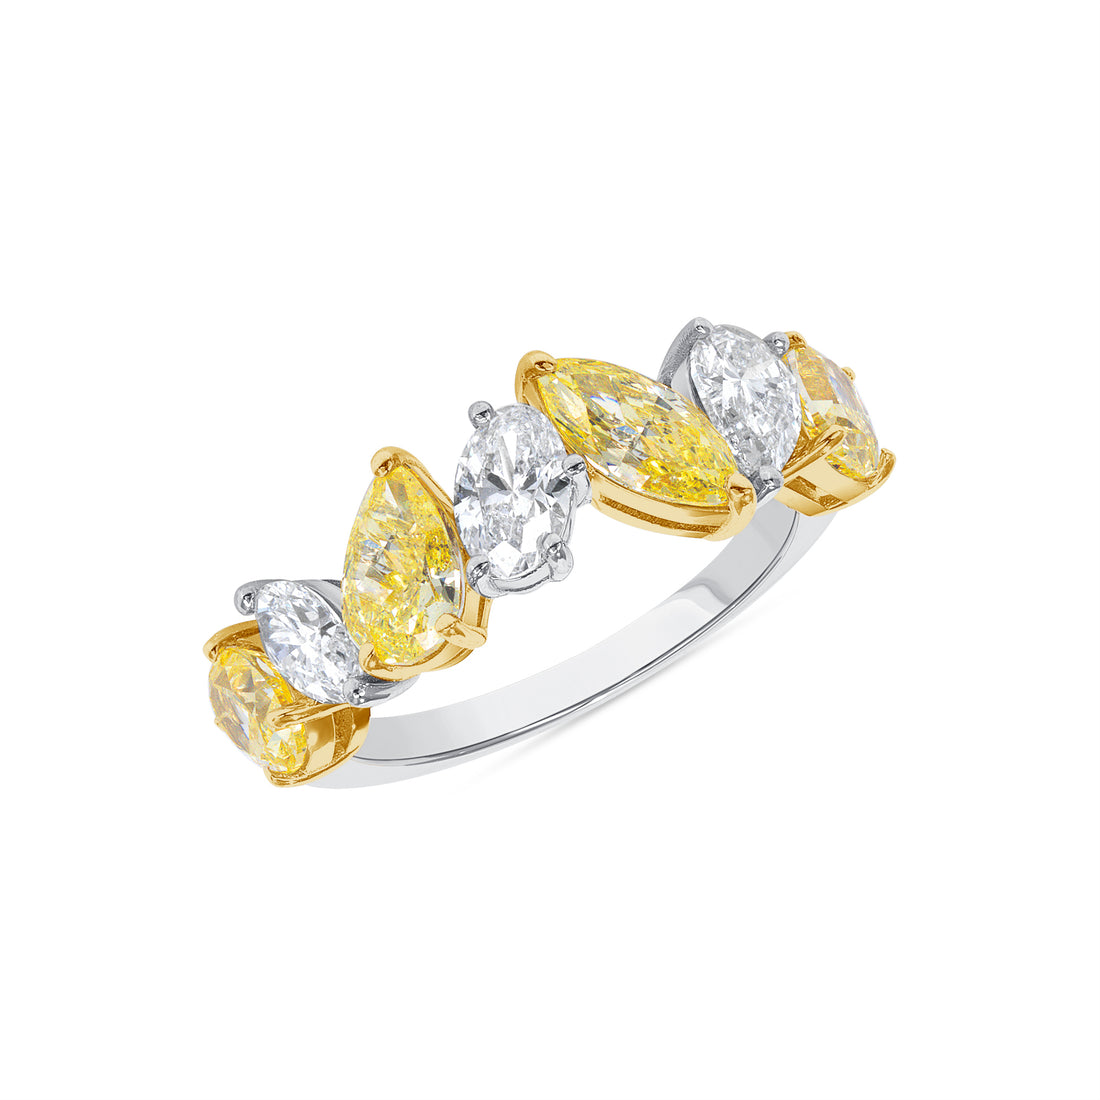 3.12 CT. Fancy Shape Fancy Yellow Diamond Ring in 18K Yellow Gold and Platinum